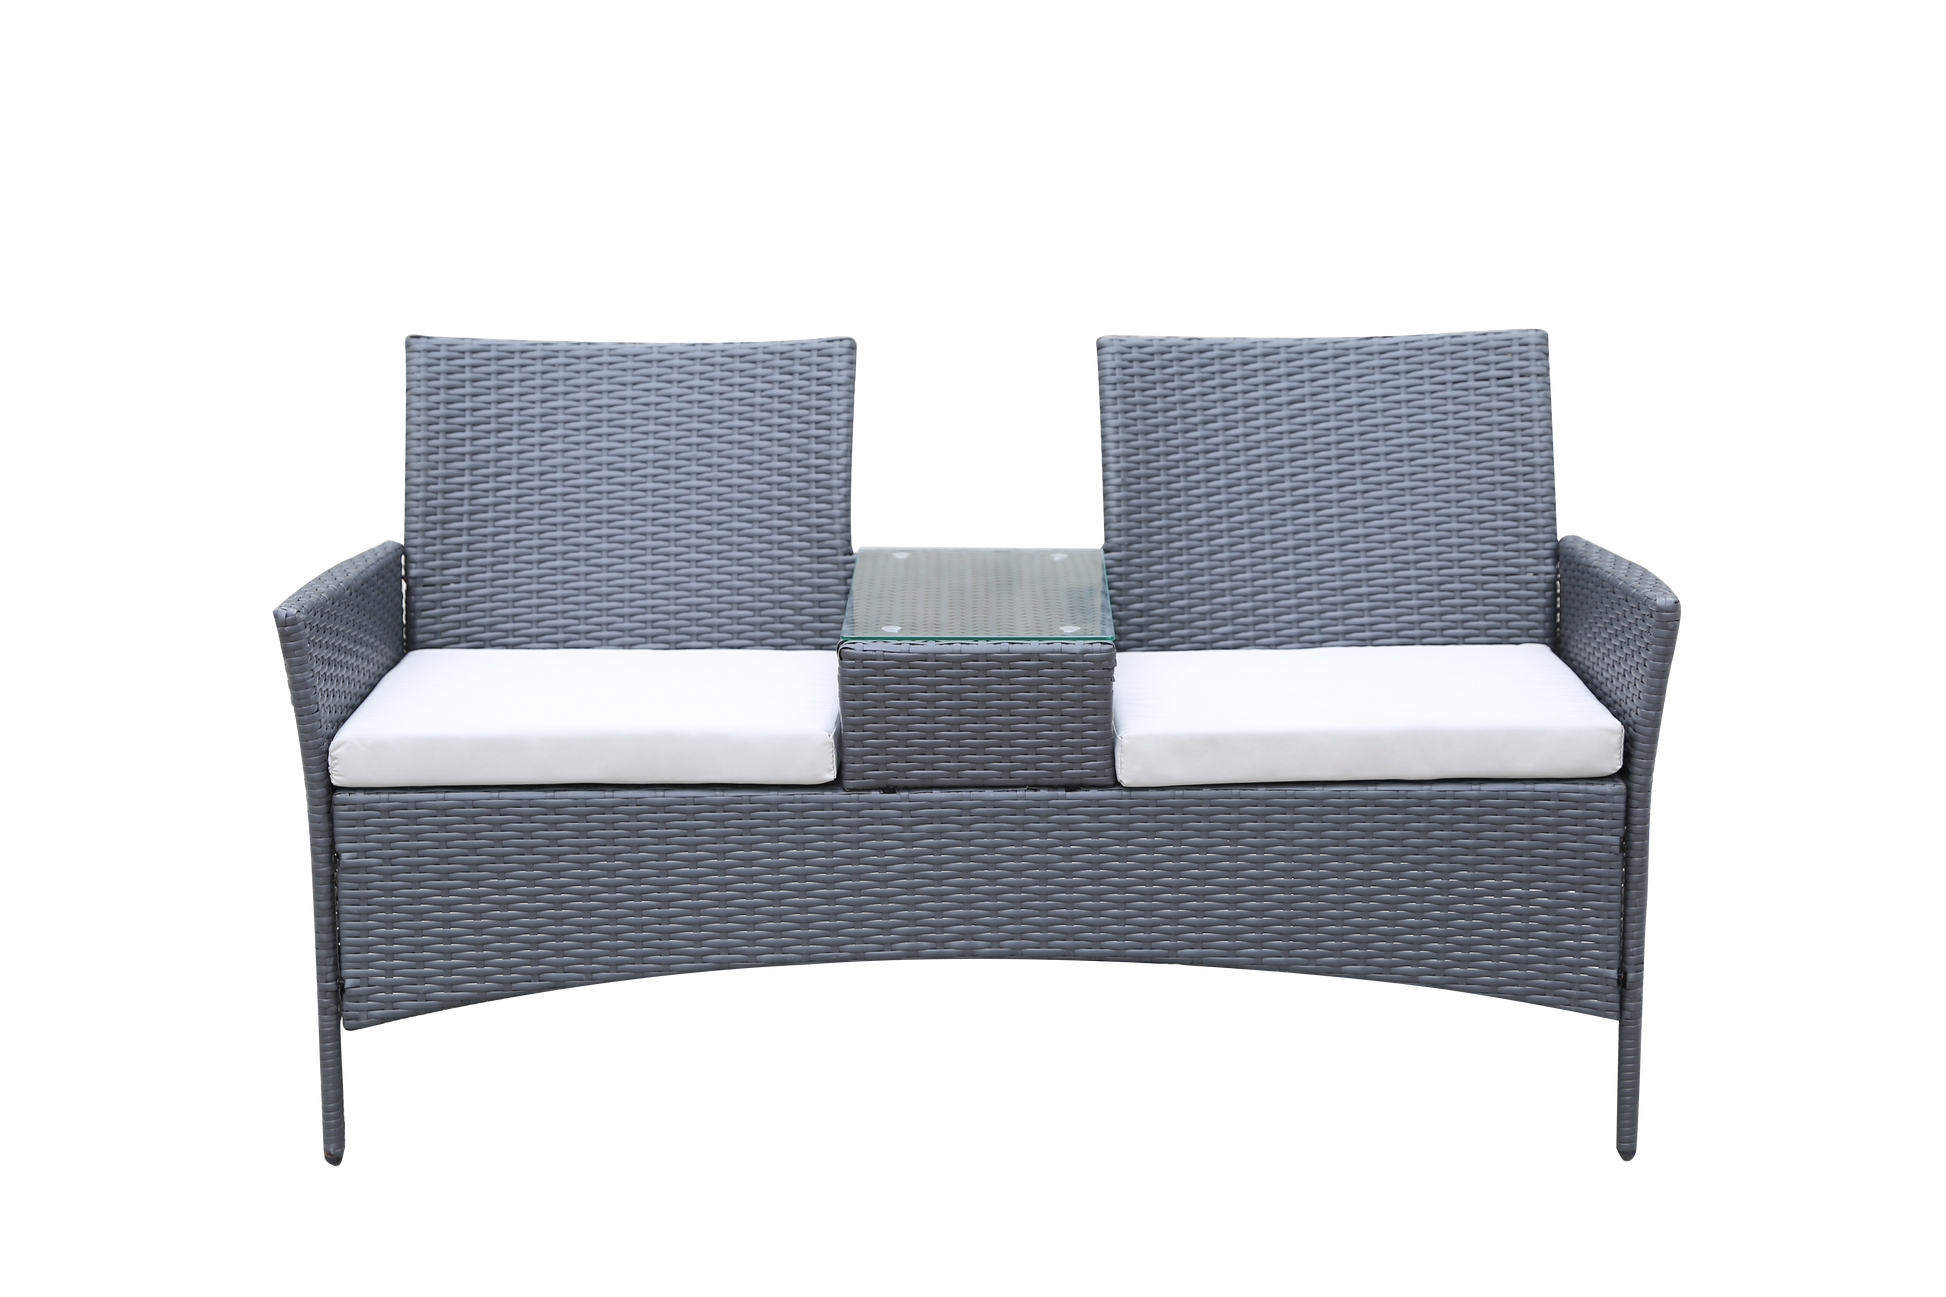 Patio Loveseat with Build-in Coffee Table Default Title